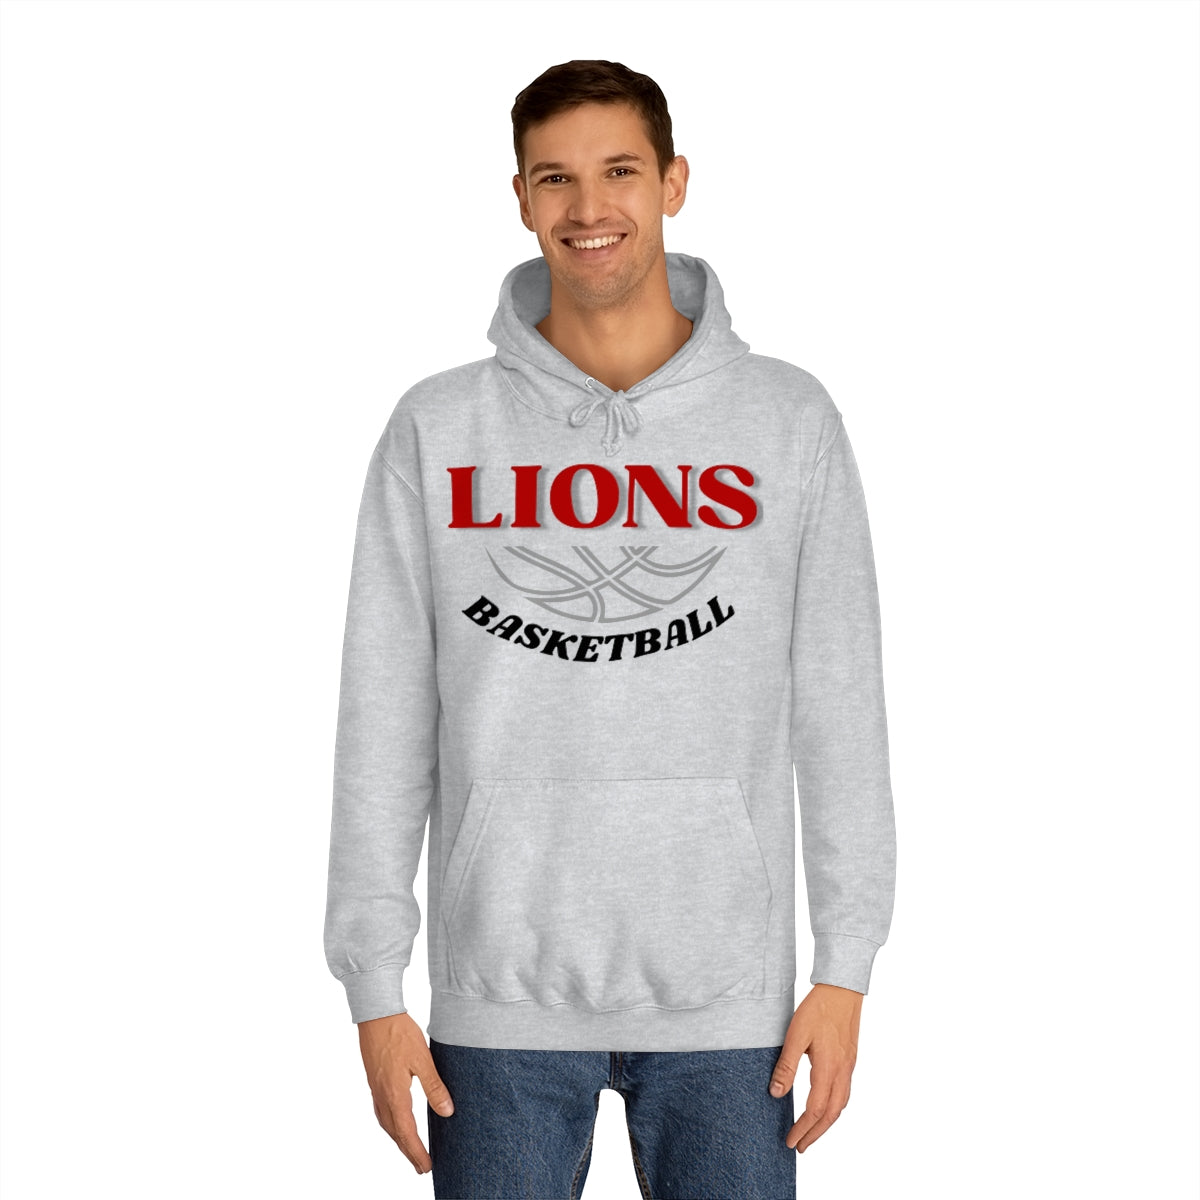 Lions Unisex College Basketball  Hoodie